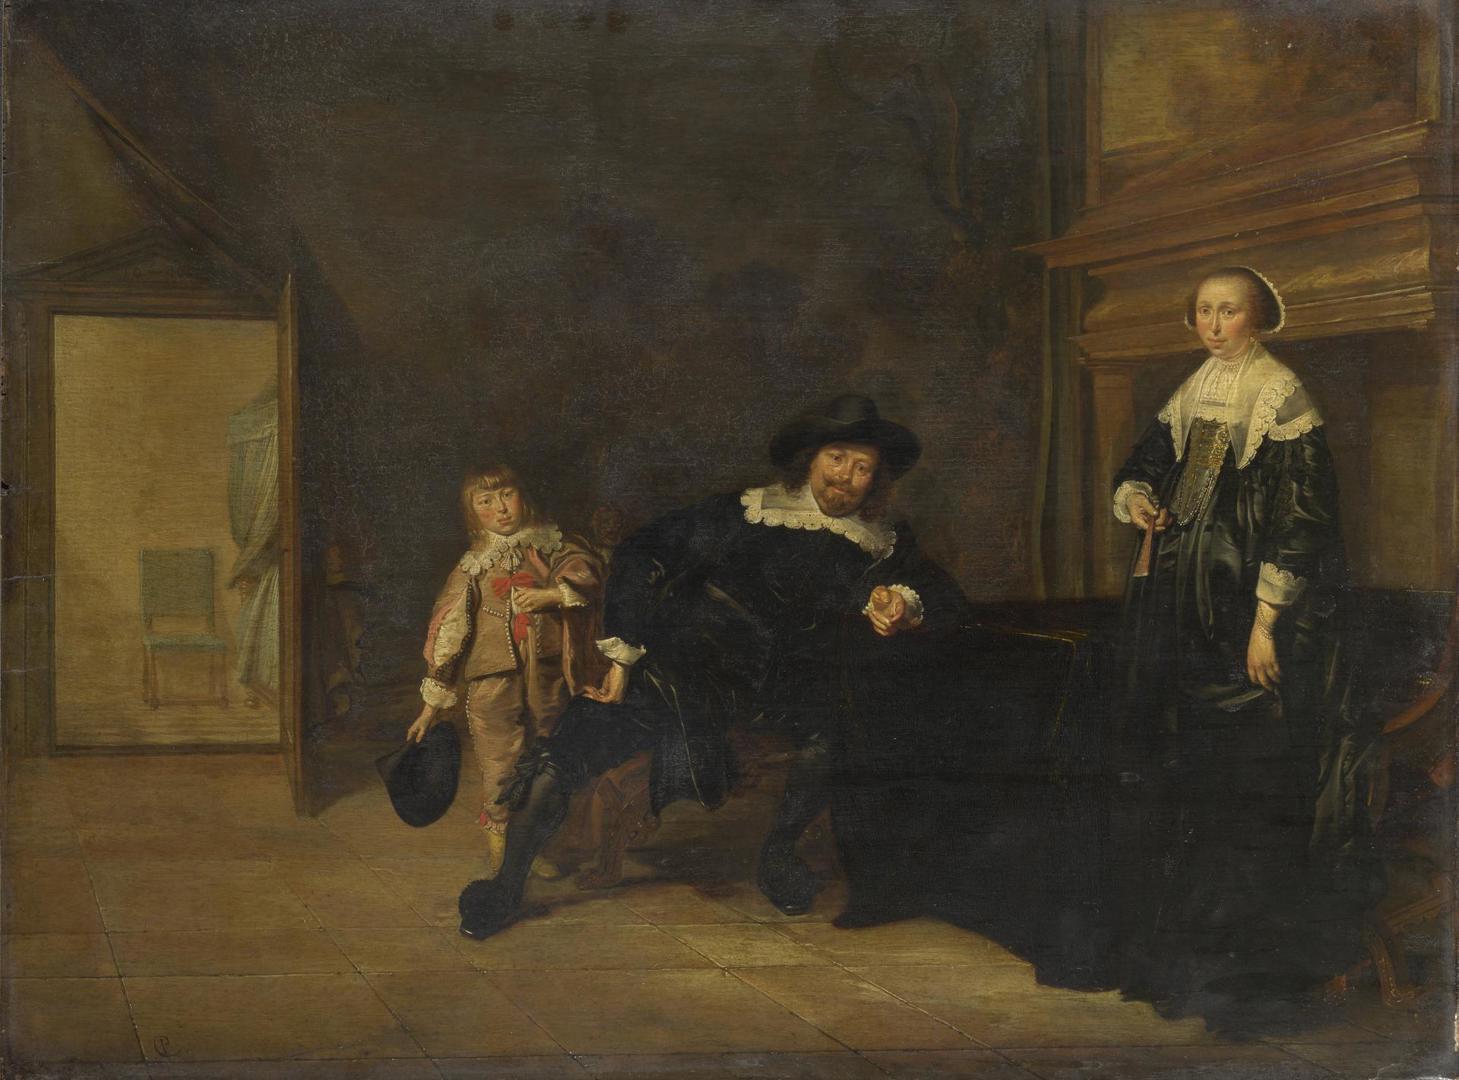 Portrait of a Man, a Woman and a Boy in a Room by Pieter Codde